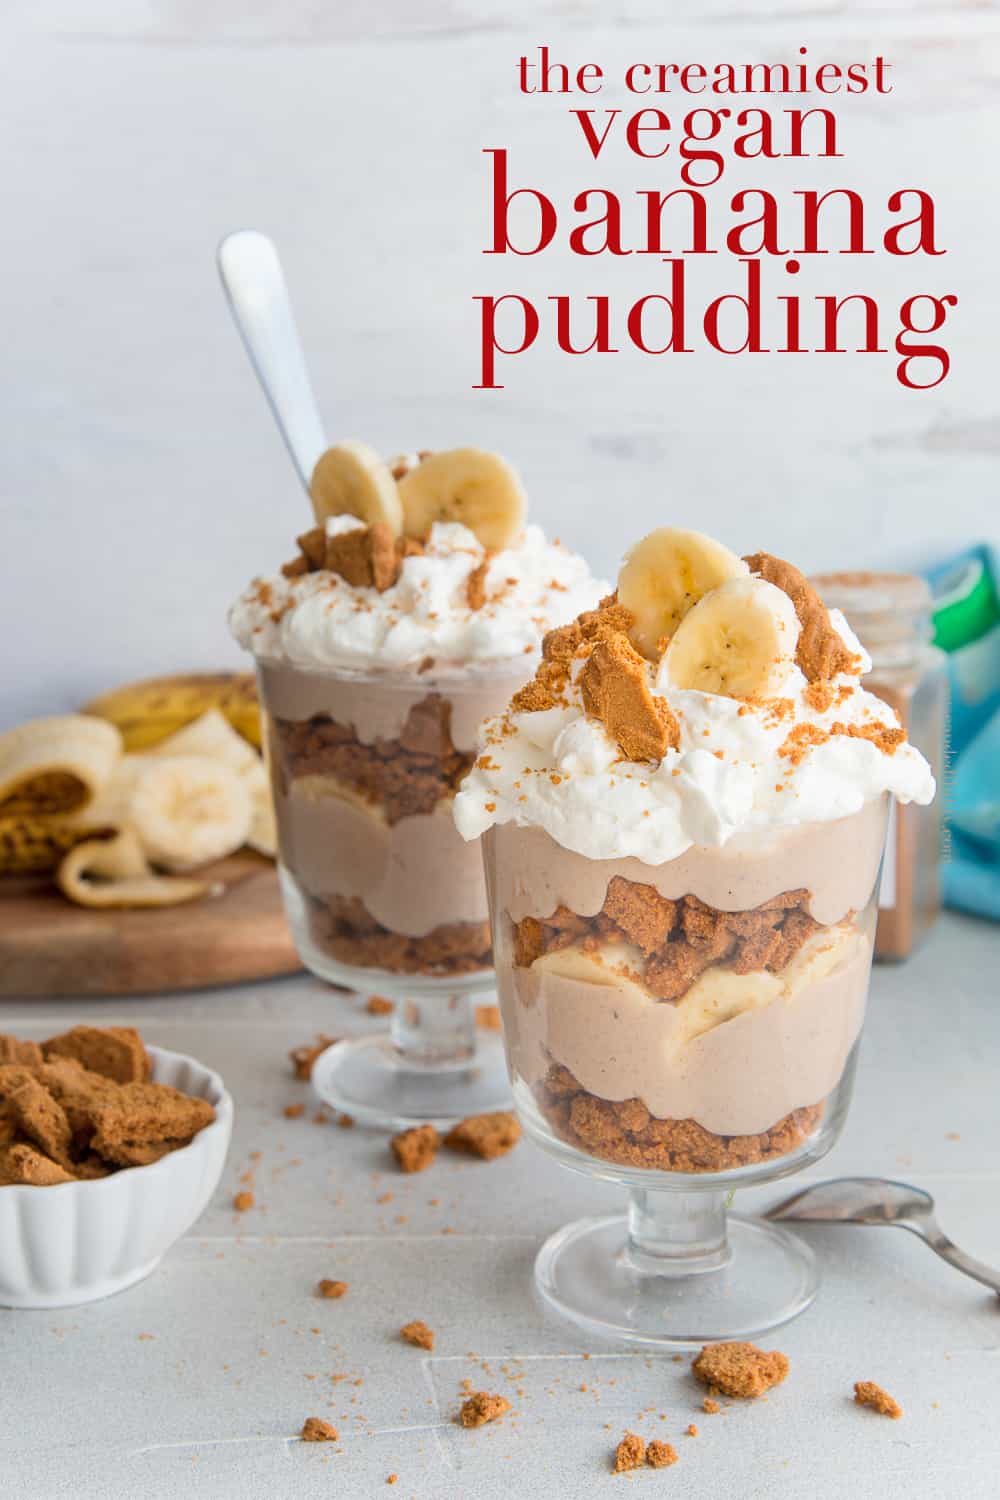 This Vegan Banana Pudding is the creamiest, plant-based banana pudding you'll ever taste. It has the same flavor you know and love from the classic Soul Food dessert, but without any dairy. Top it with dairy-free whipped topping or leave it plain. #vegandesserts #dessertrecipe #desserts #bananapudding #bananas #soybeans #unitedsoybeanboard #bestfoodfacts #sponsored #veganrecipes via @ediblesense